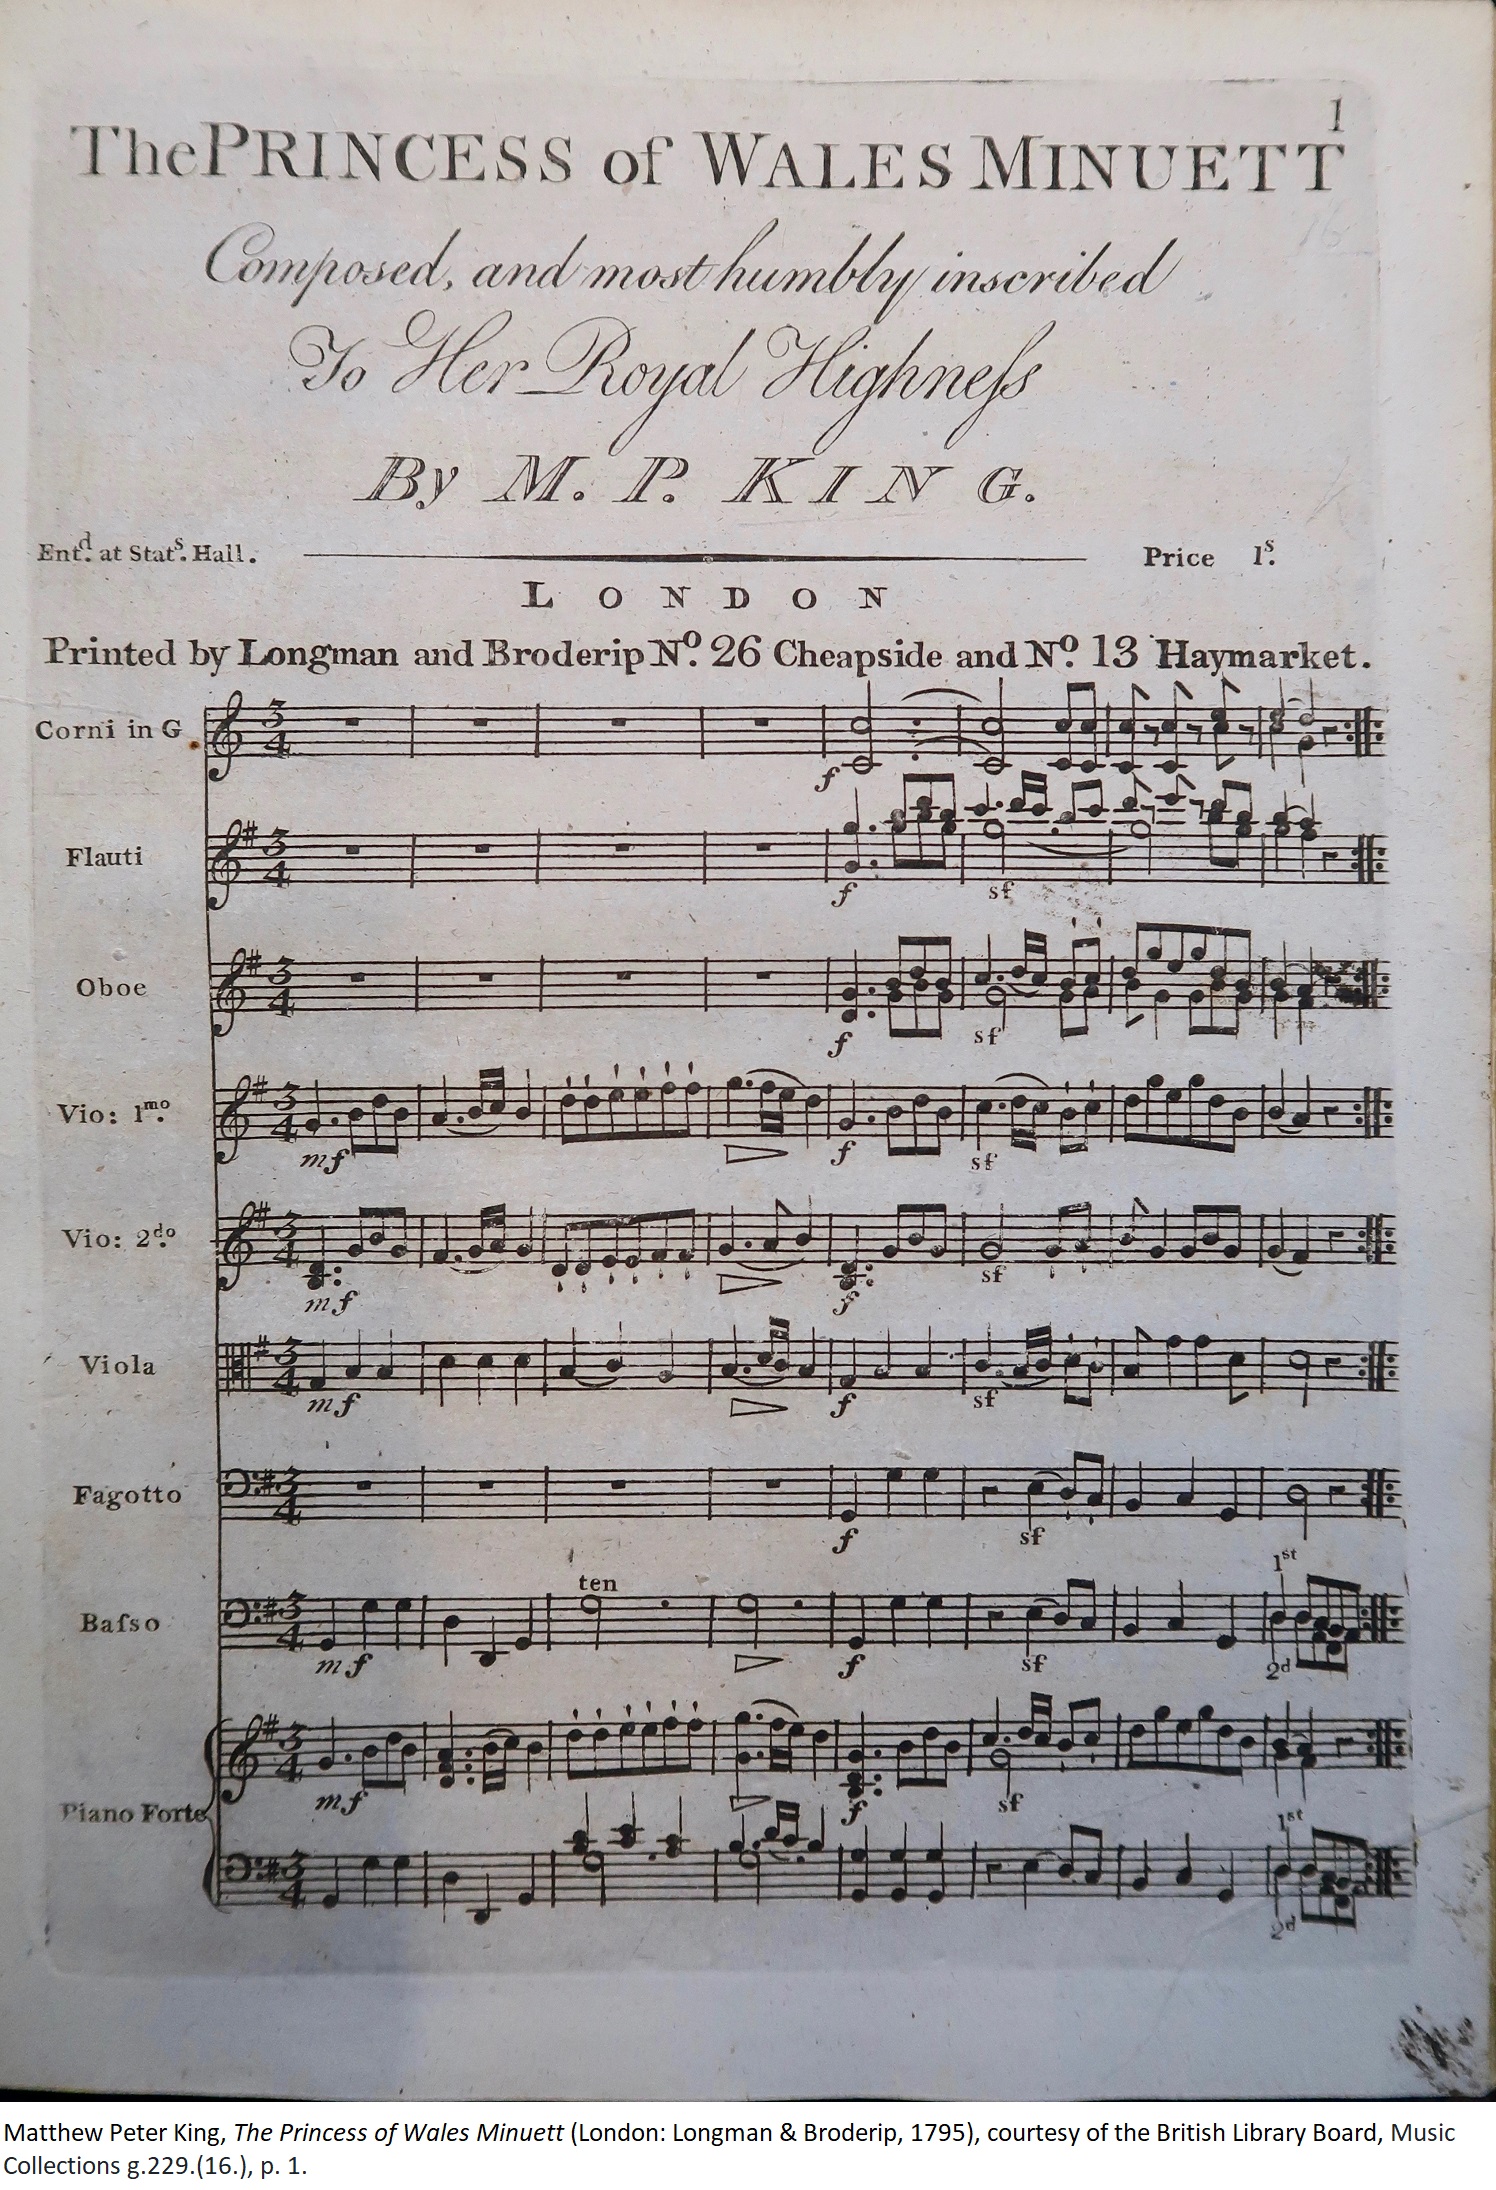 Matthew Peter King, The Princess of Wales Minuett (London: Longman & Broderip, 1795), courtesy of the British Library Board, Music Collections g.229.(16.), p. 1.